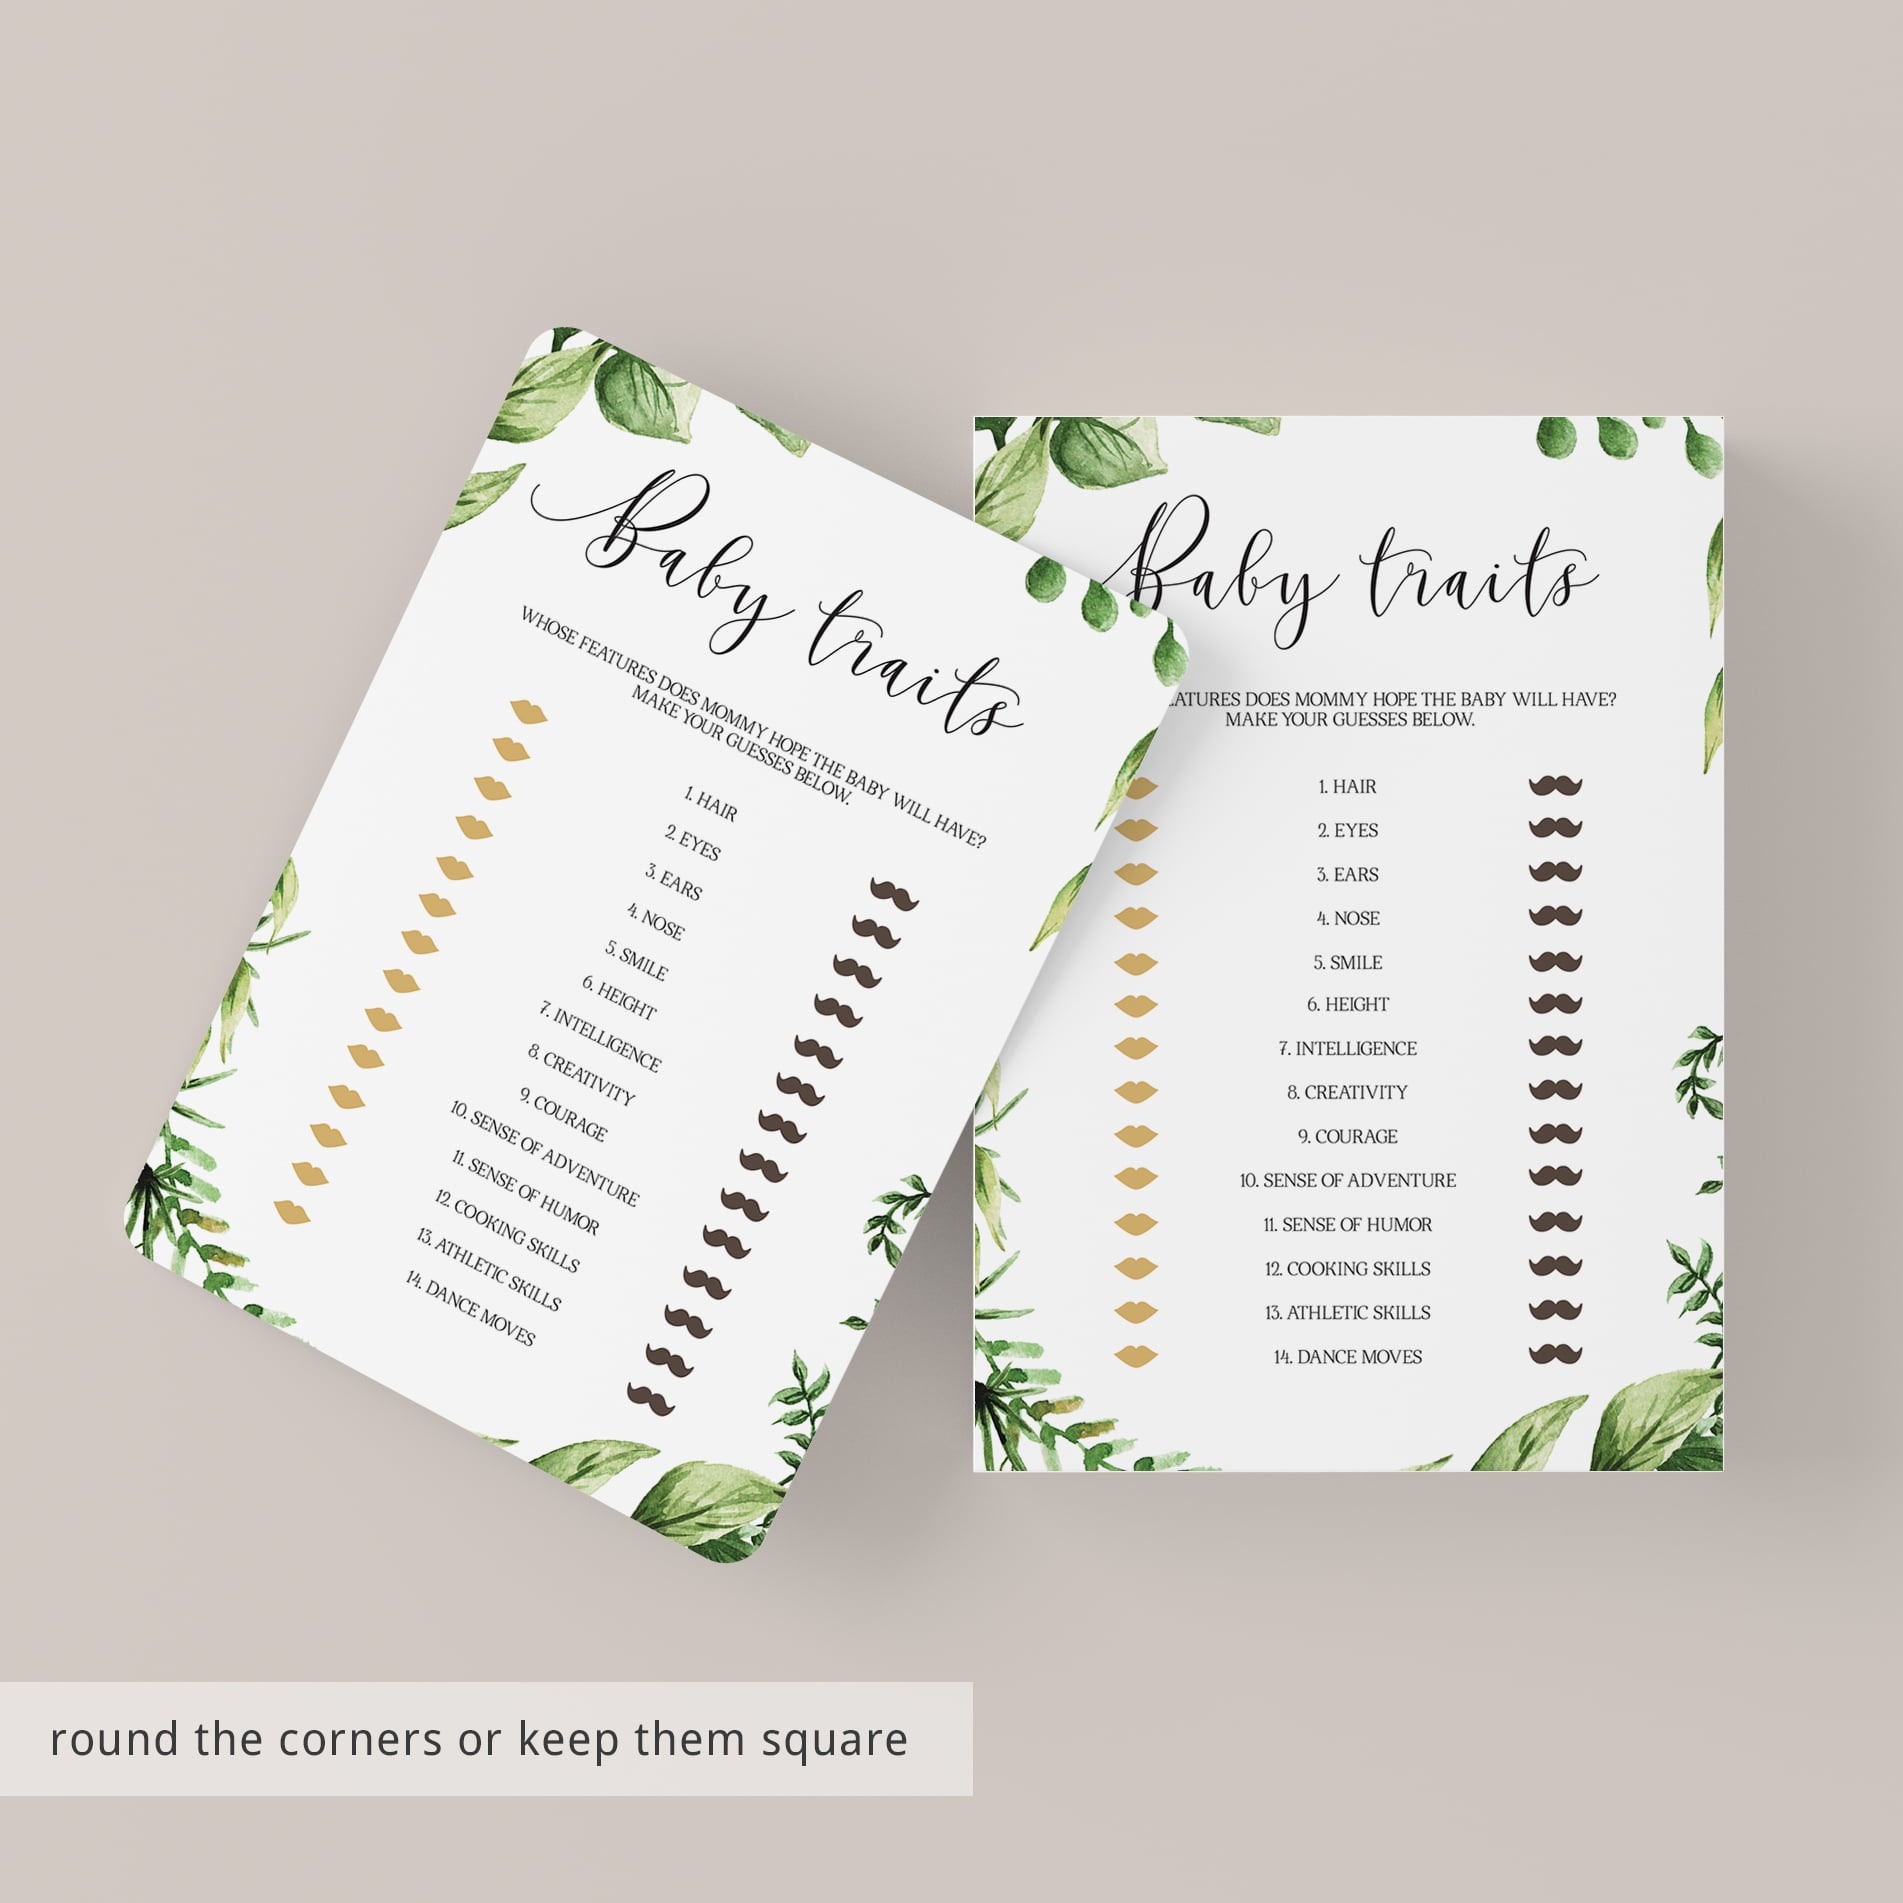 DIY baby traits baby shower game files by LittleSizzle